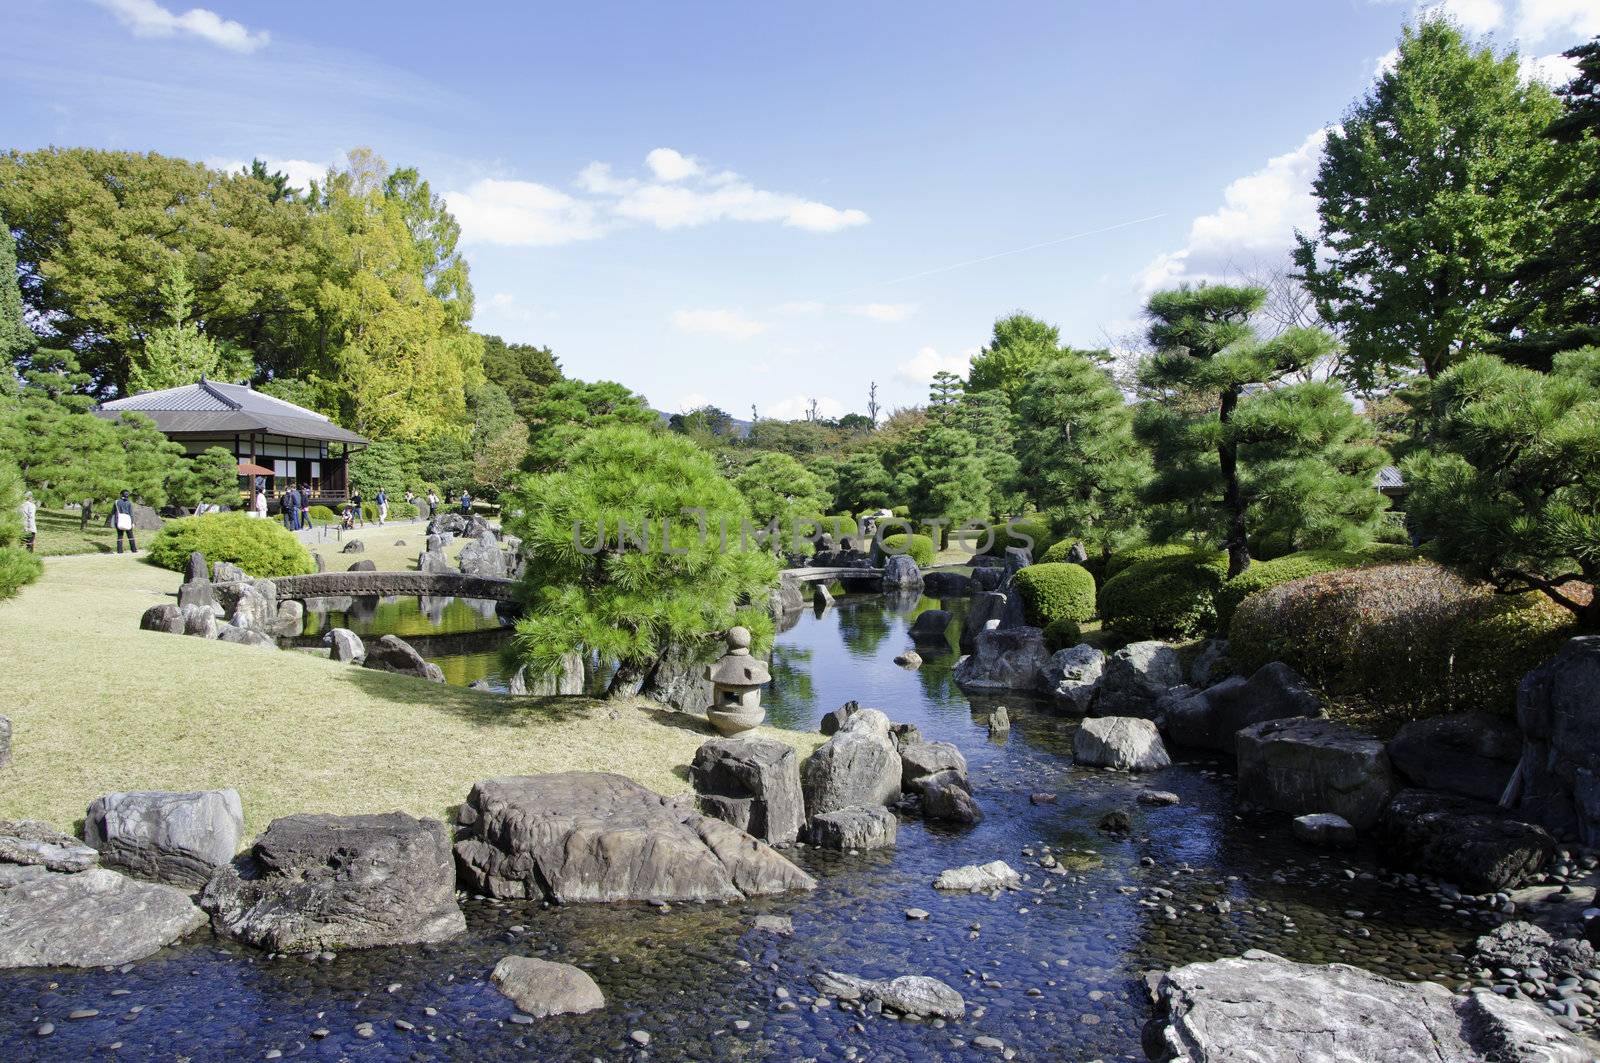 Garden with pond in japanese style, Kyoto, Japan